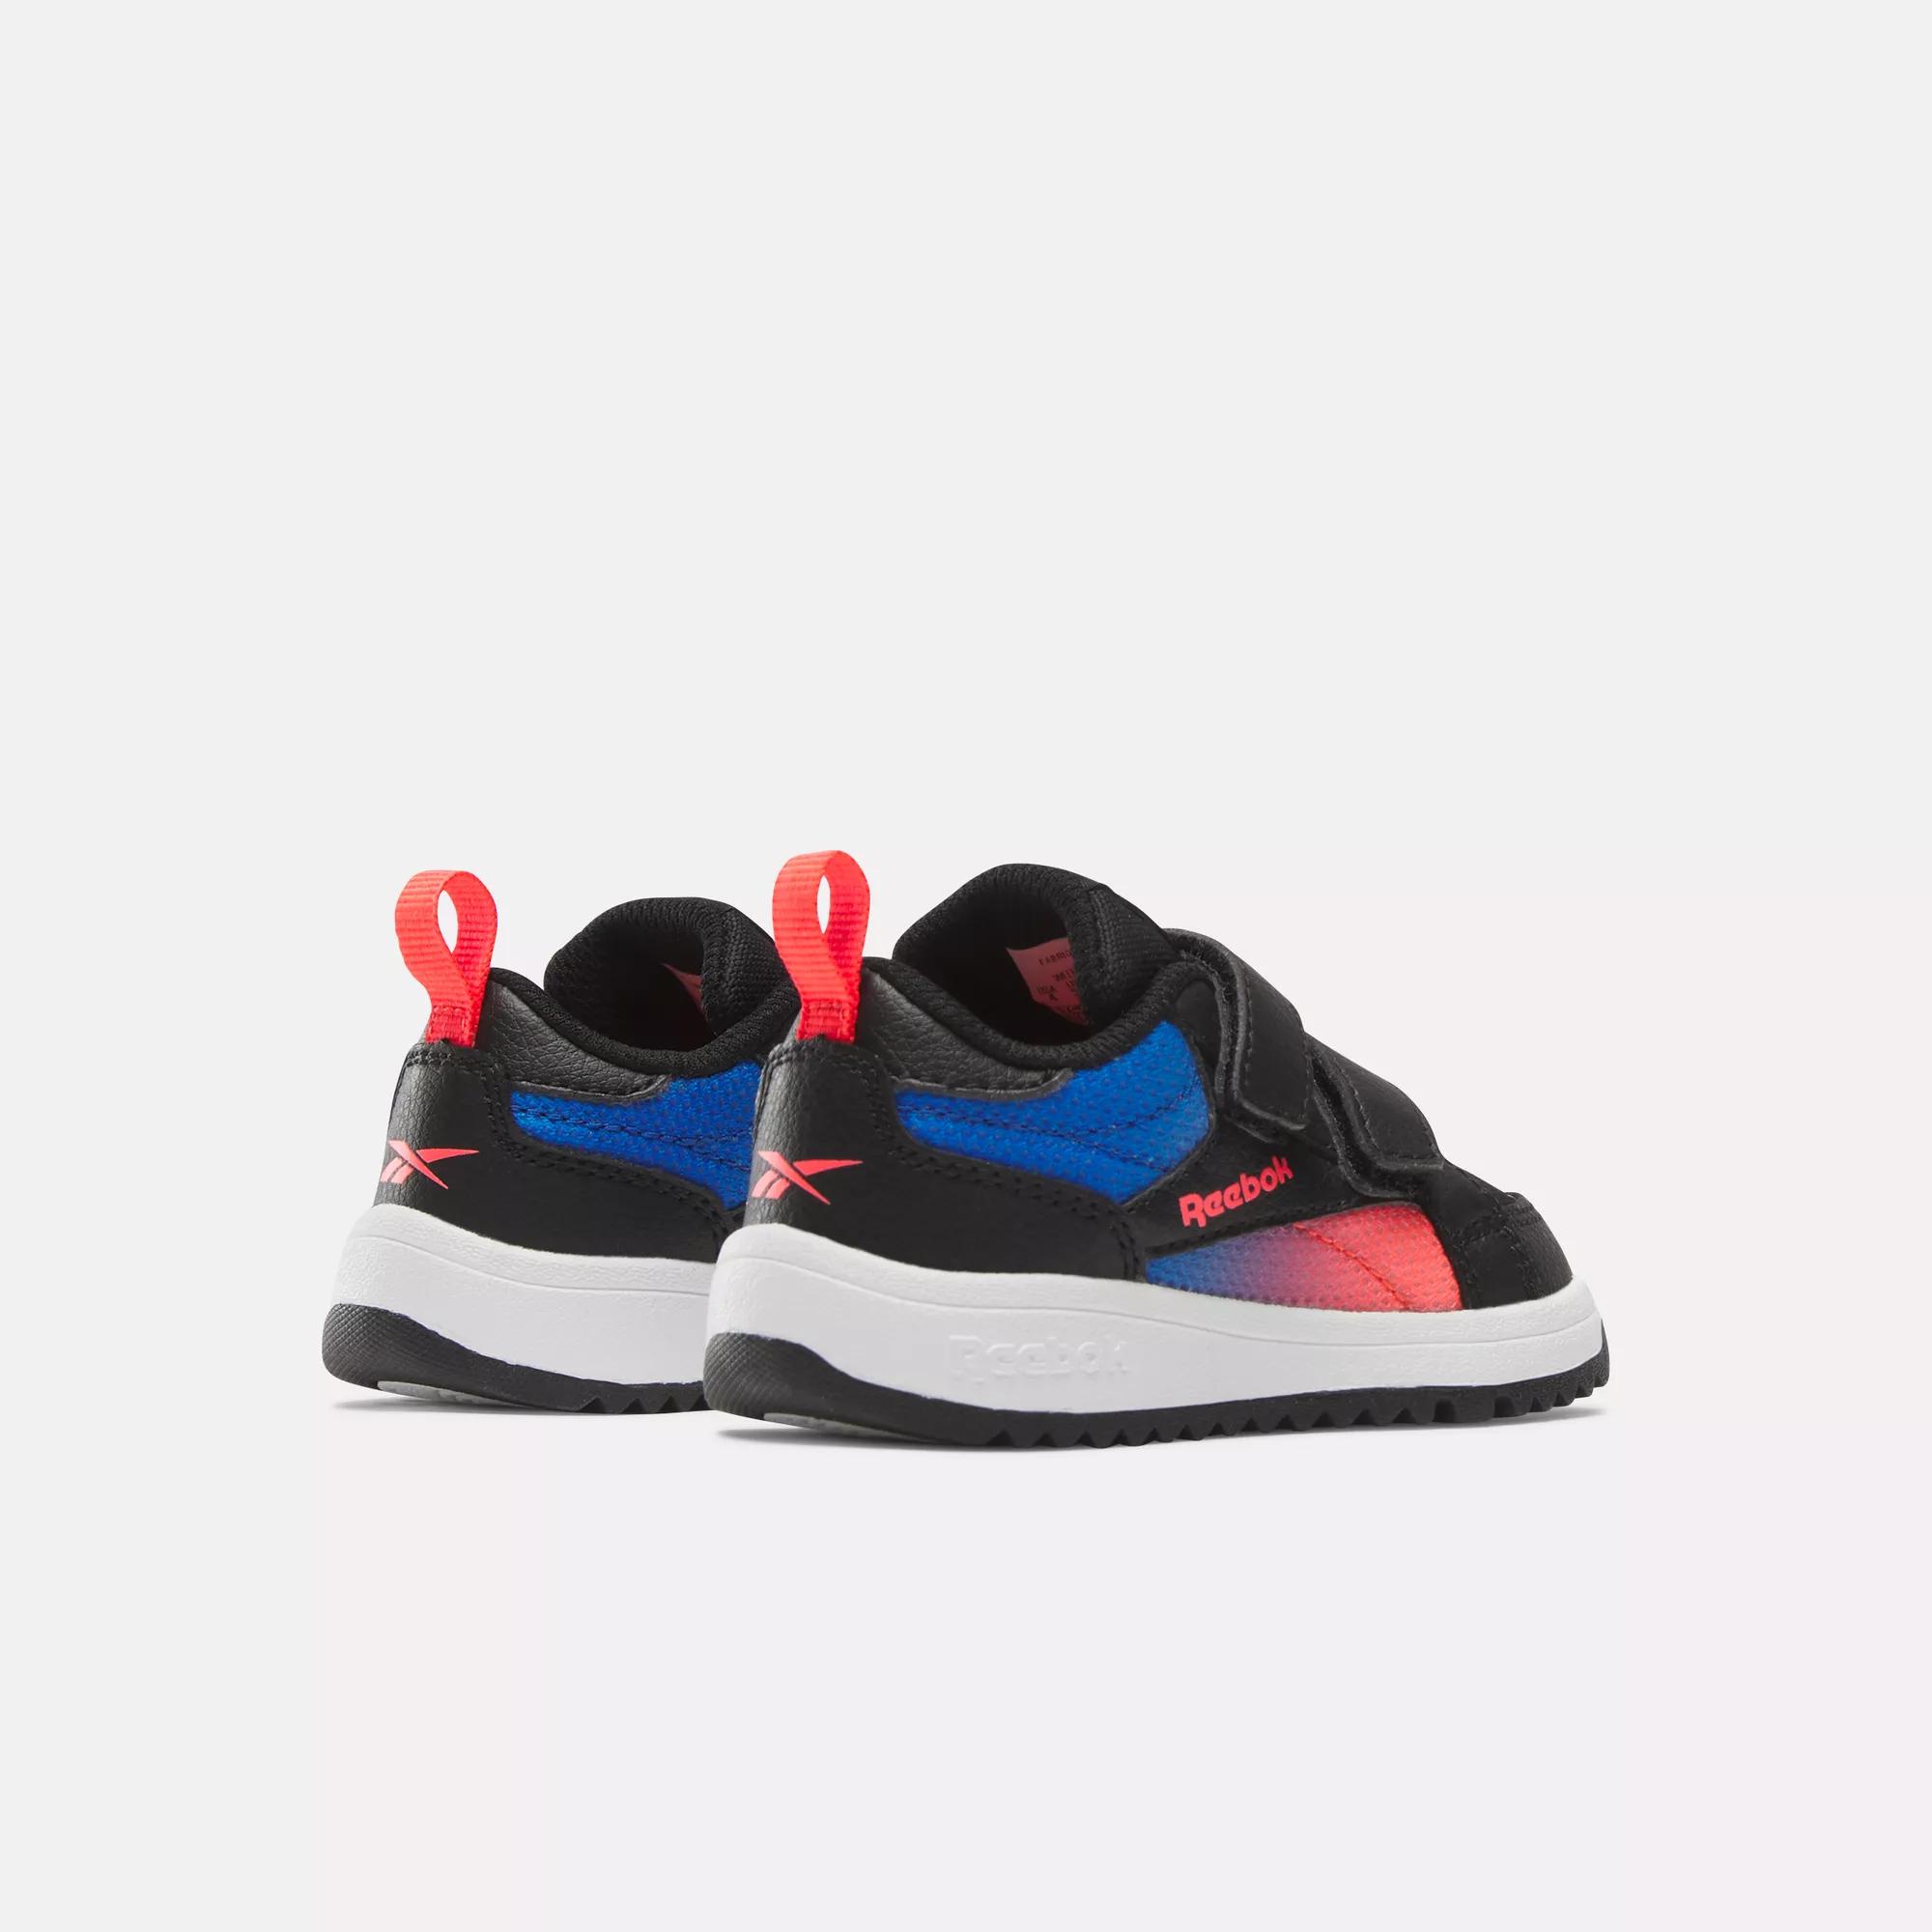 Reebok Black Toddler Clasp | Weebok - - Cherry Core / Shoes Low / Neon Electric Cobalt